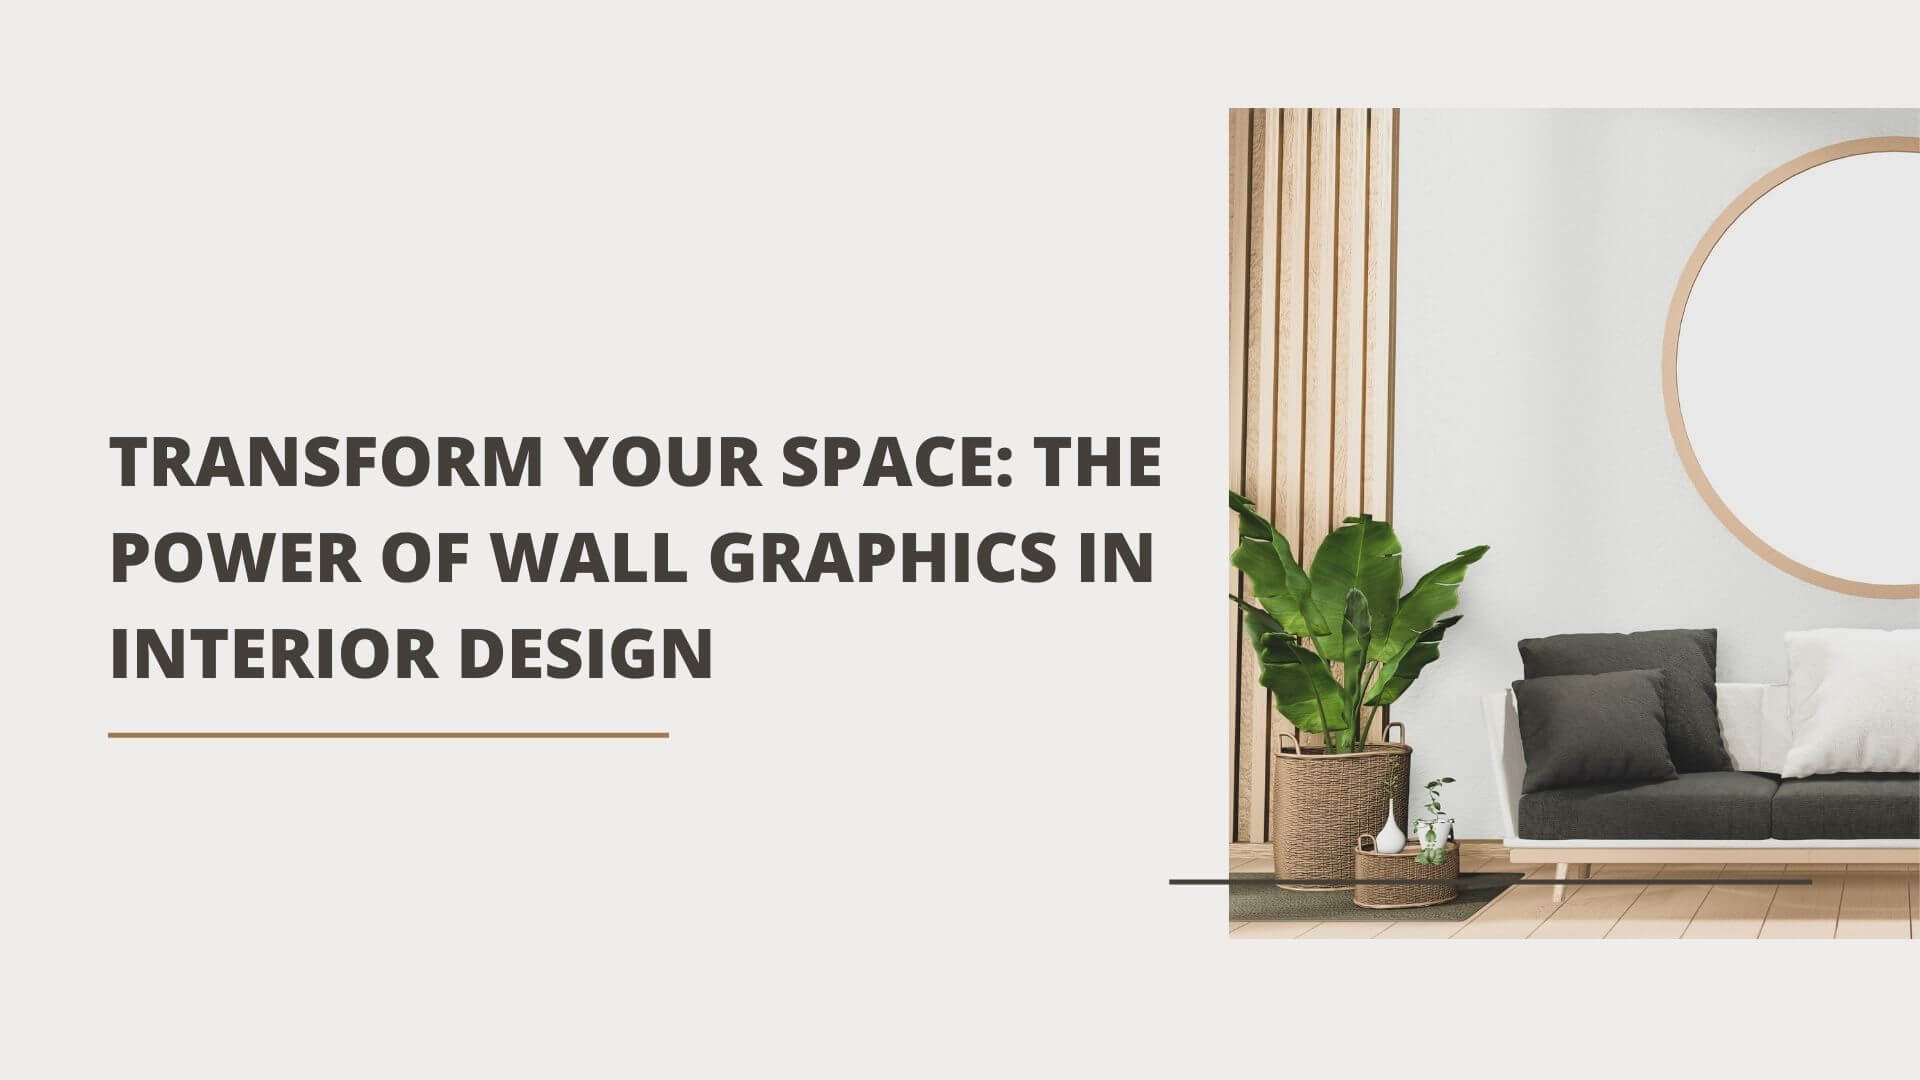 Transform Your Space: The Power of Wall Graphics in Interior Design